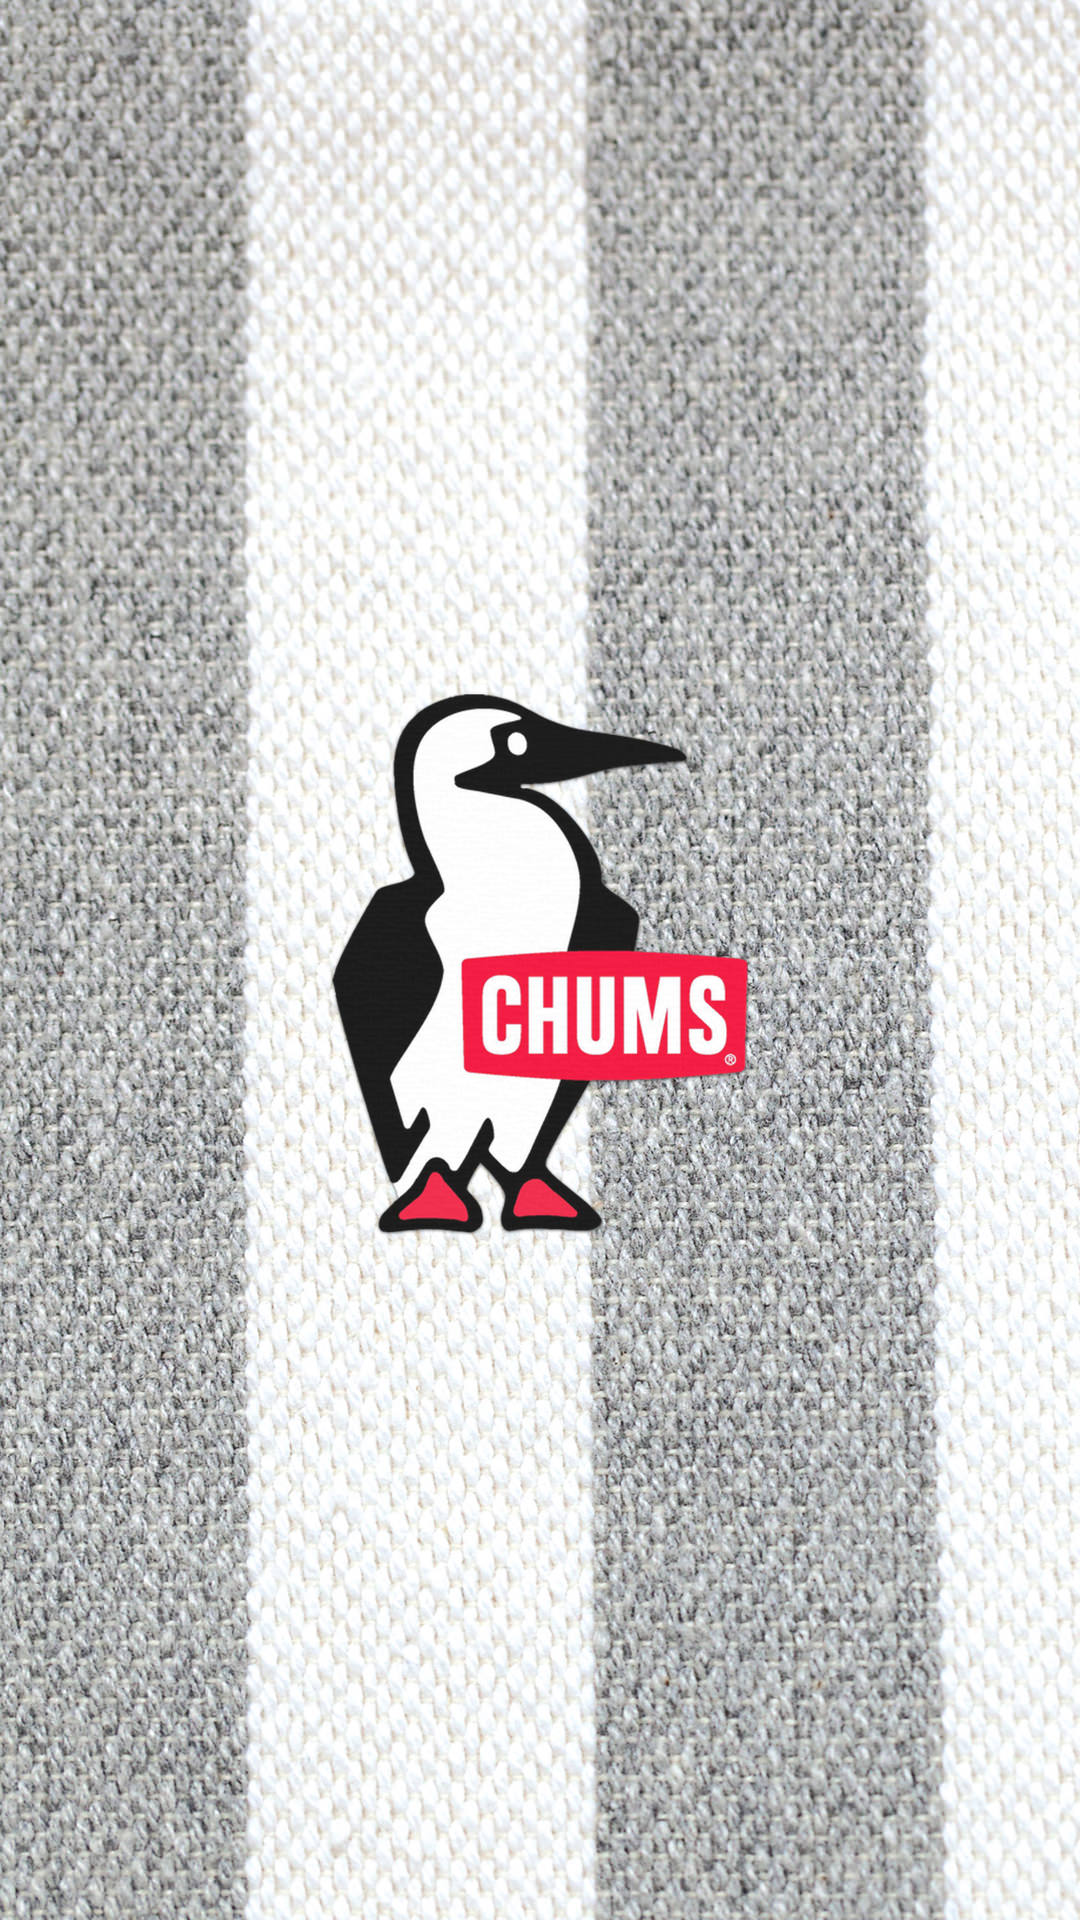 Chums Iphone Wallpapers